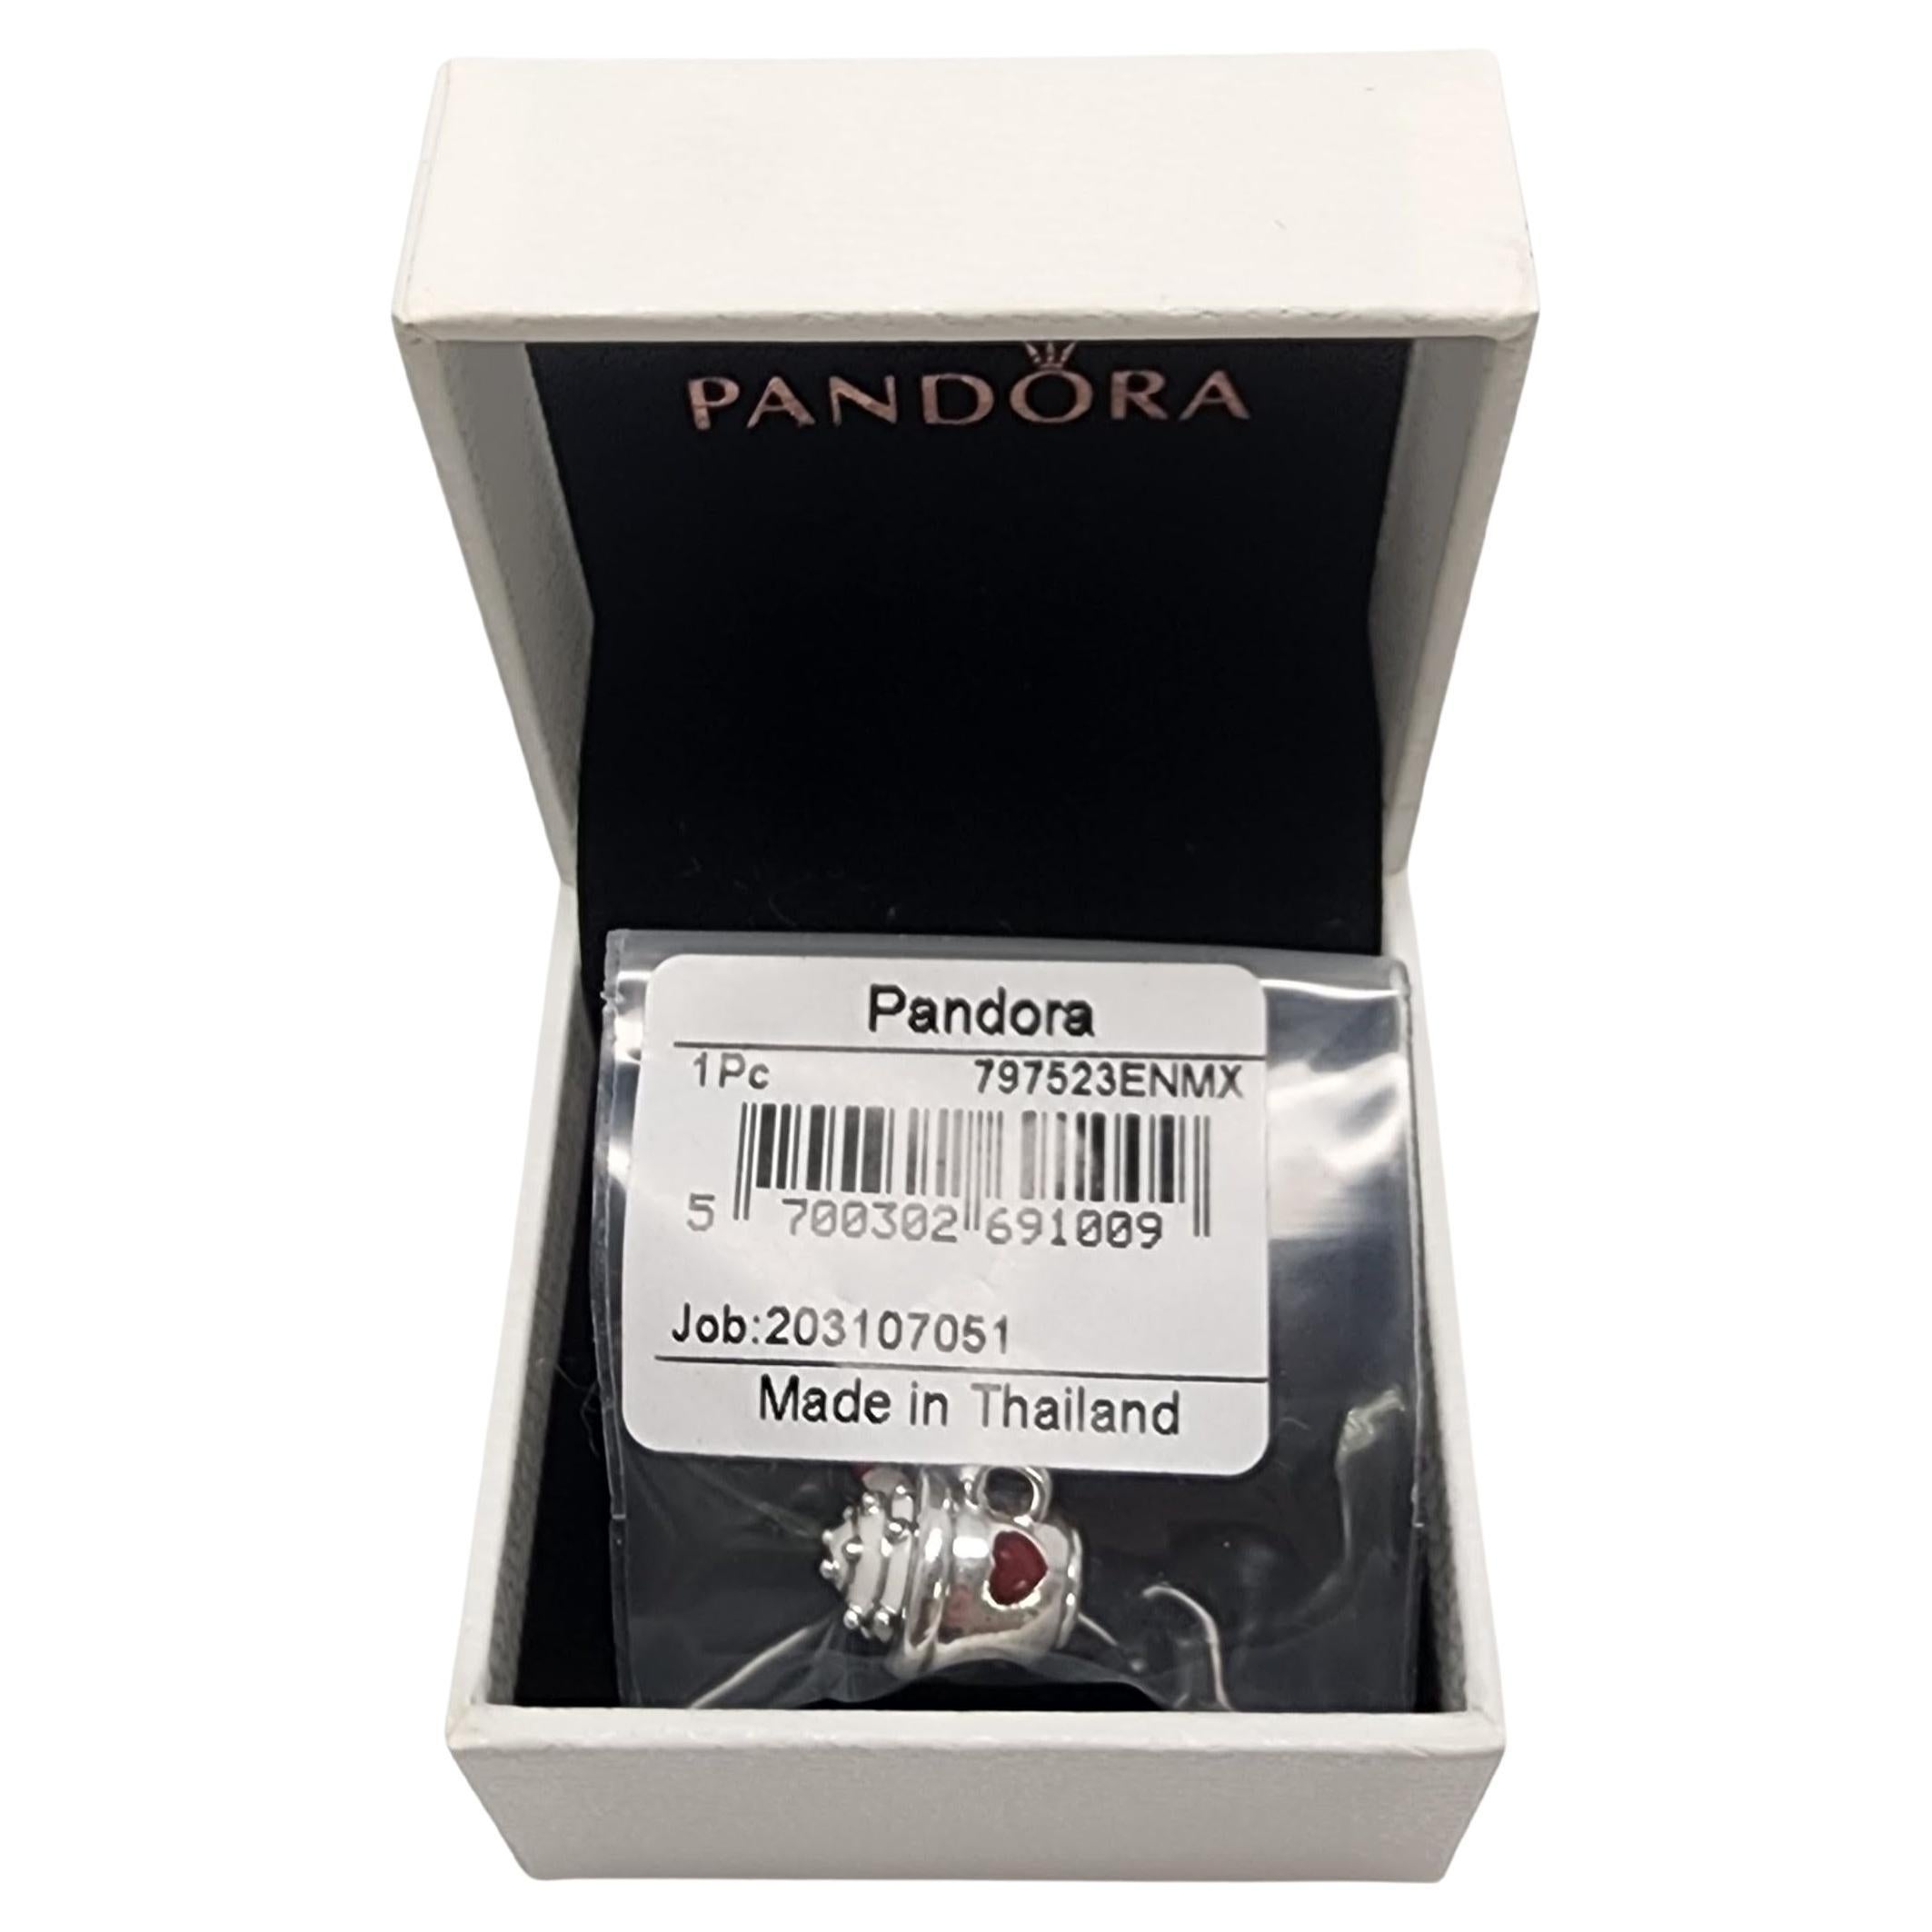 Authentic Pandora Sterling Silver Cocoa & Candy Cane Charm w/Box #15327